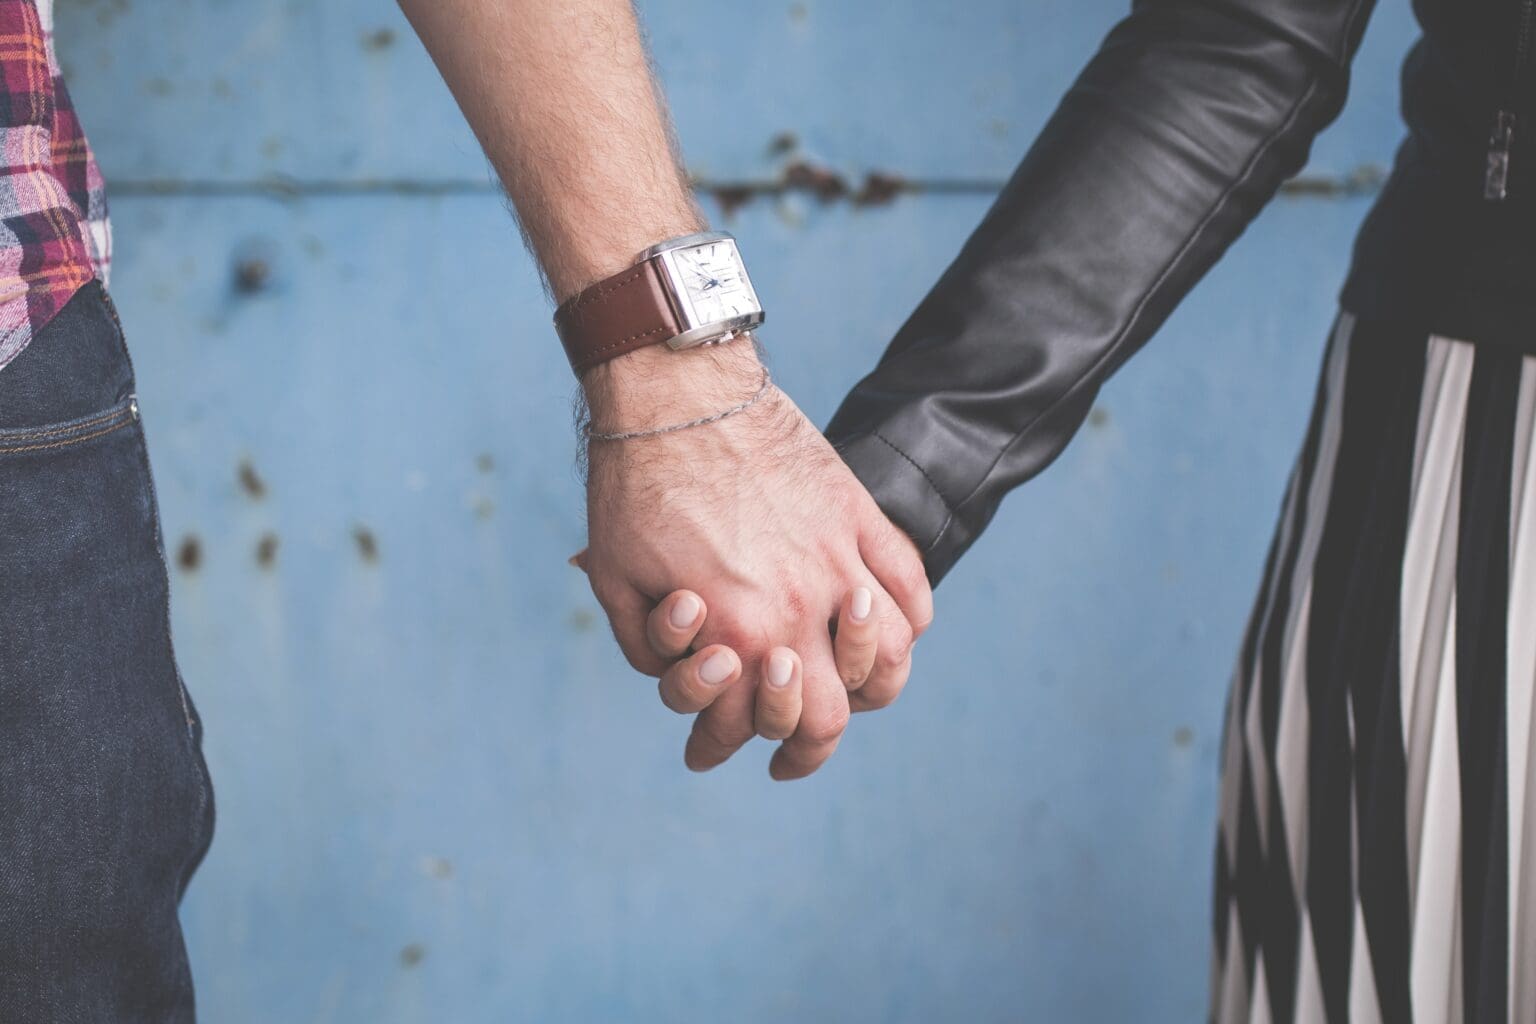 Male holding female hand. Hi wearing a watch. She is wearing a black leather jacket.